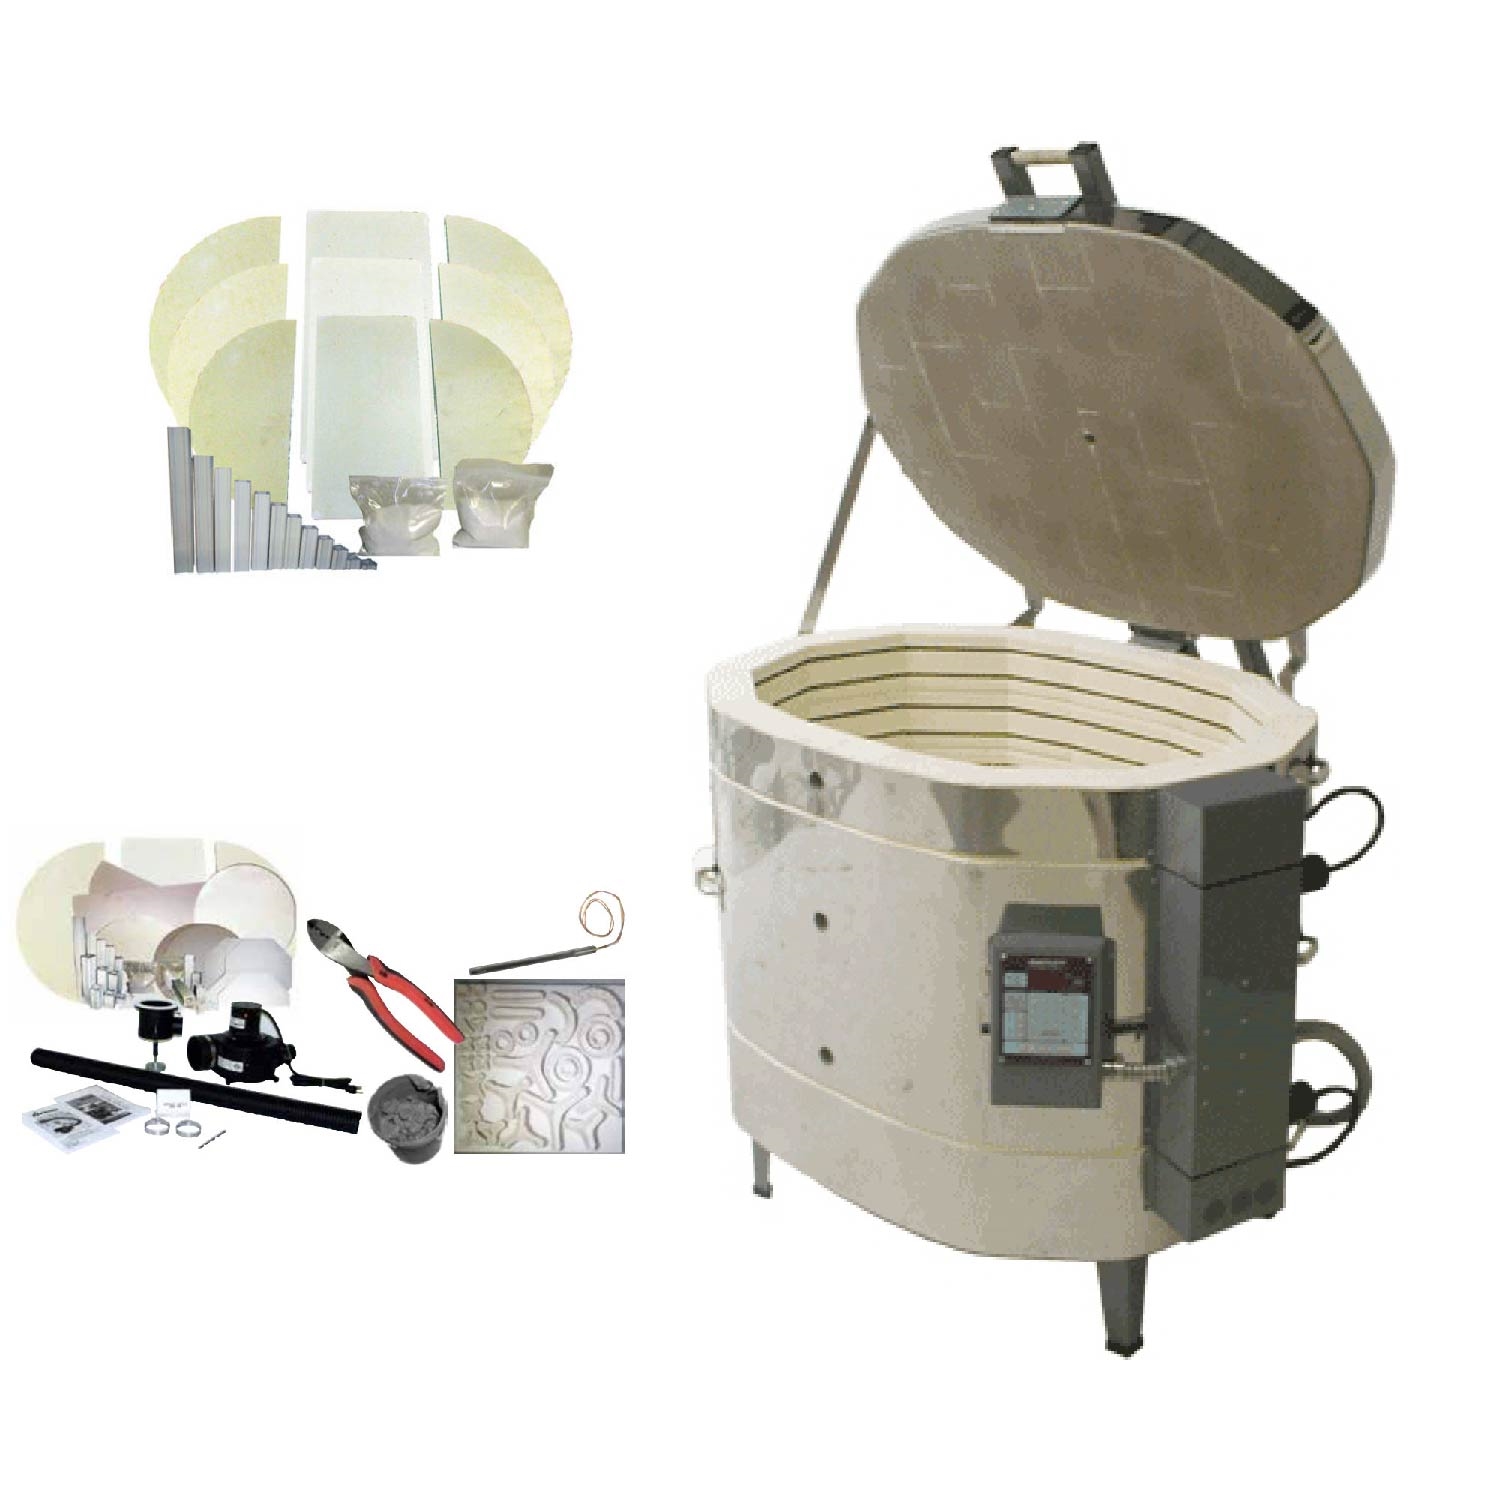 Olympic FREEDOM 2527HE KILN PACKAGE: Cone 10, Electronic Control with Vent, Furniture Kit and More!